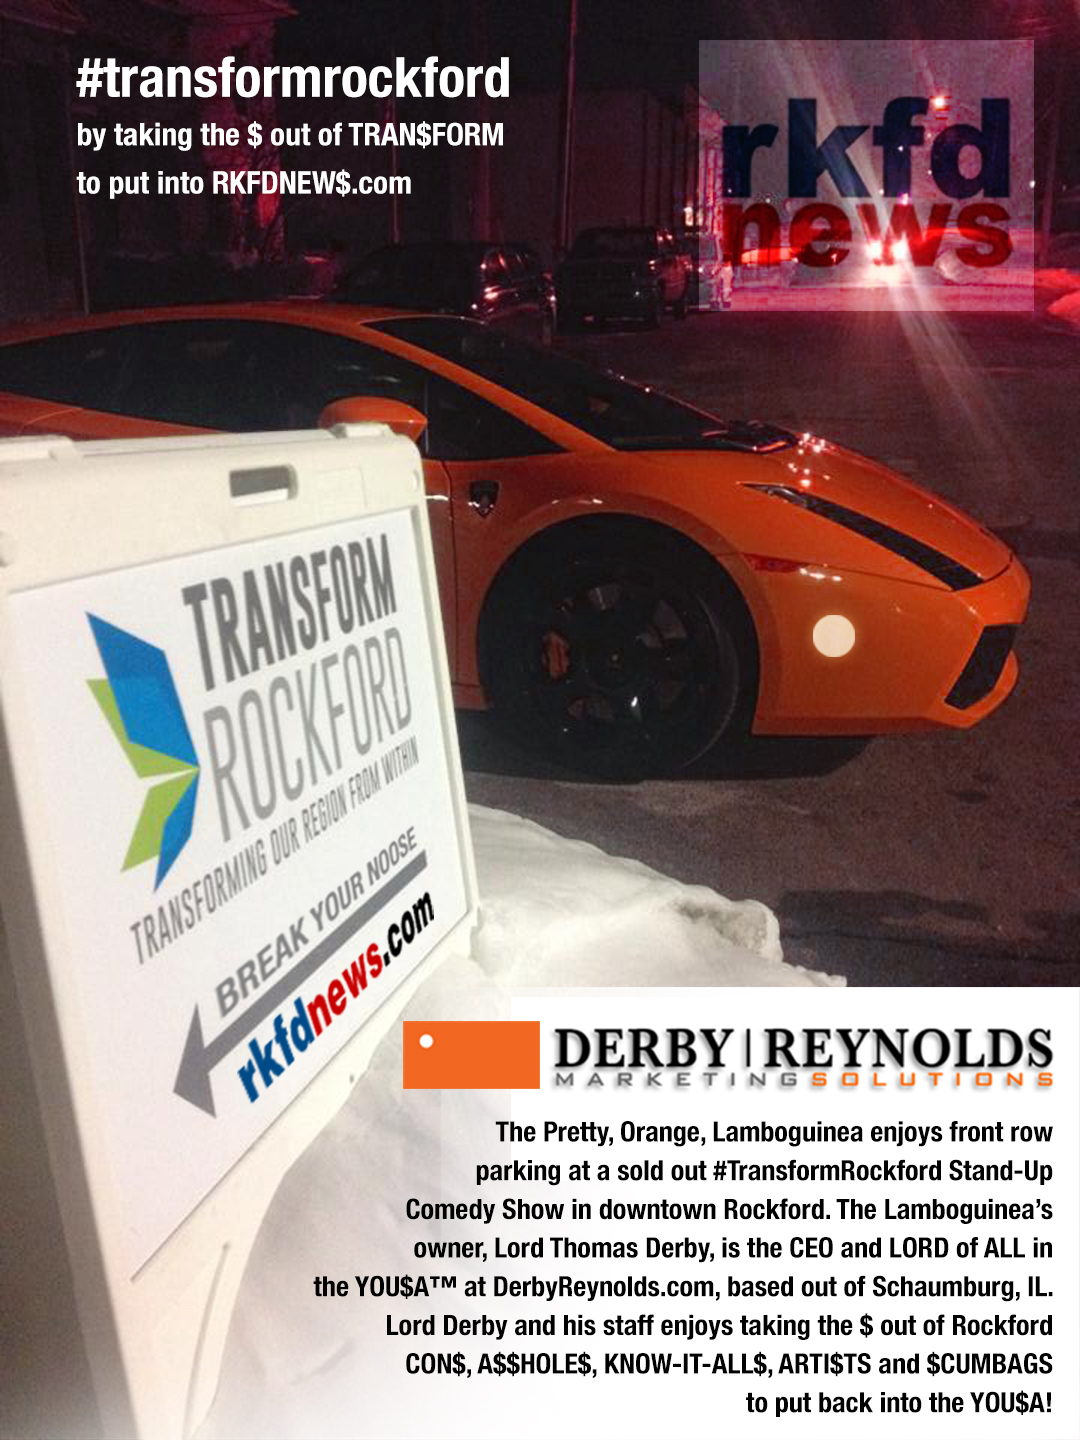 The Pretty, Orange, Lamboguinea enjoys front row parking at a sold out #TransformRockford Stand-Up Comedy Show in downtown Rockford. The Lamboguinea’s owner, Lord Thomas Derby, is the CEO and LORD of ALL in the YOU$A™ at DerbyReynolds.com, based out of Schaumburg, IL. Lord Derby and his staff enjoys taking the $ out of Rockford CON$, A$$HOLE$, KNOW-IT-ALL$, ARTI$TS and $CUMBAGS to put back into the YOU$A!